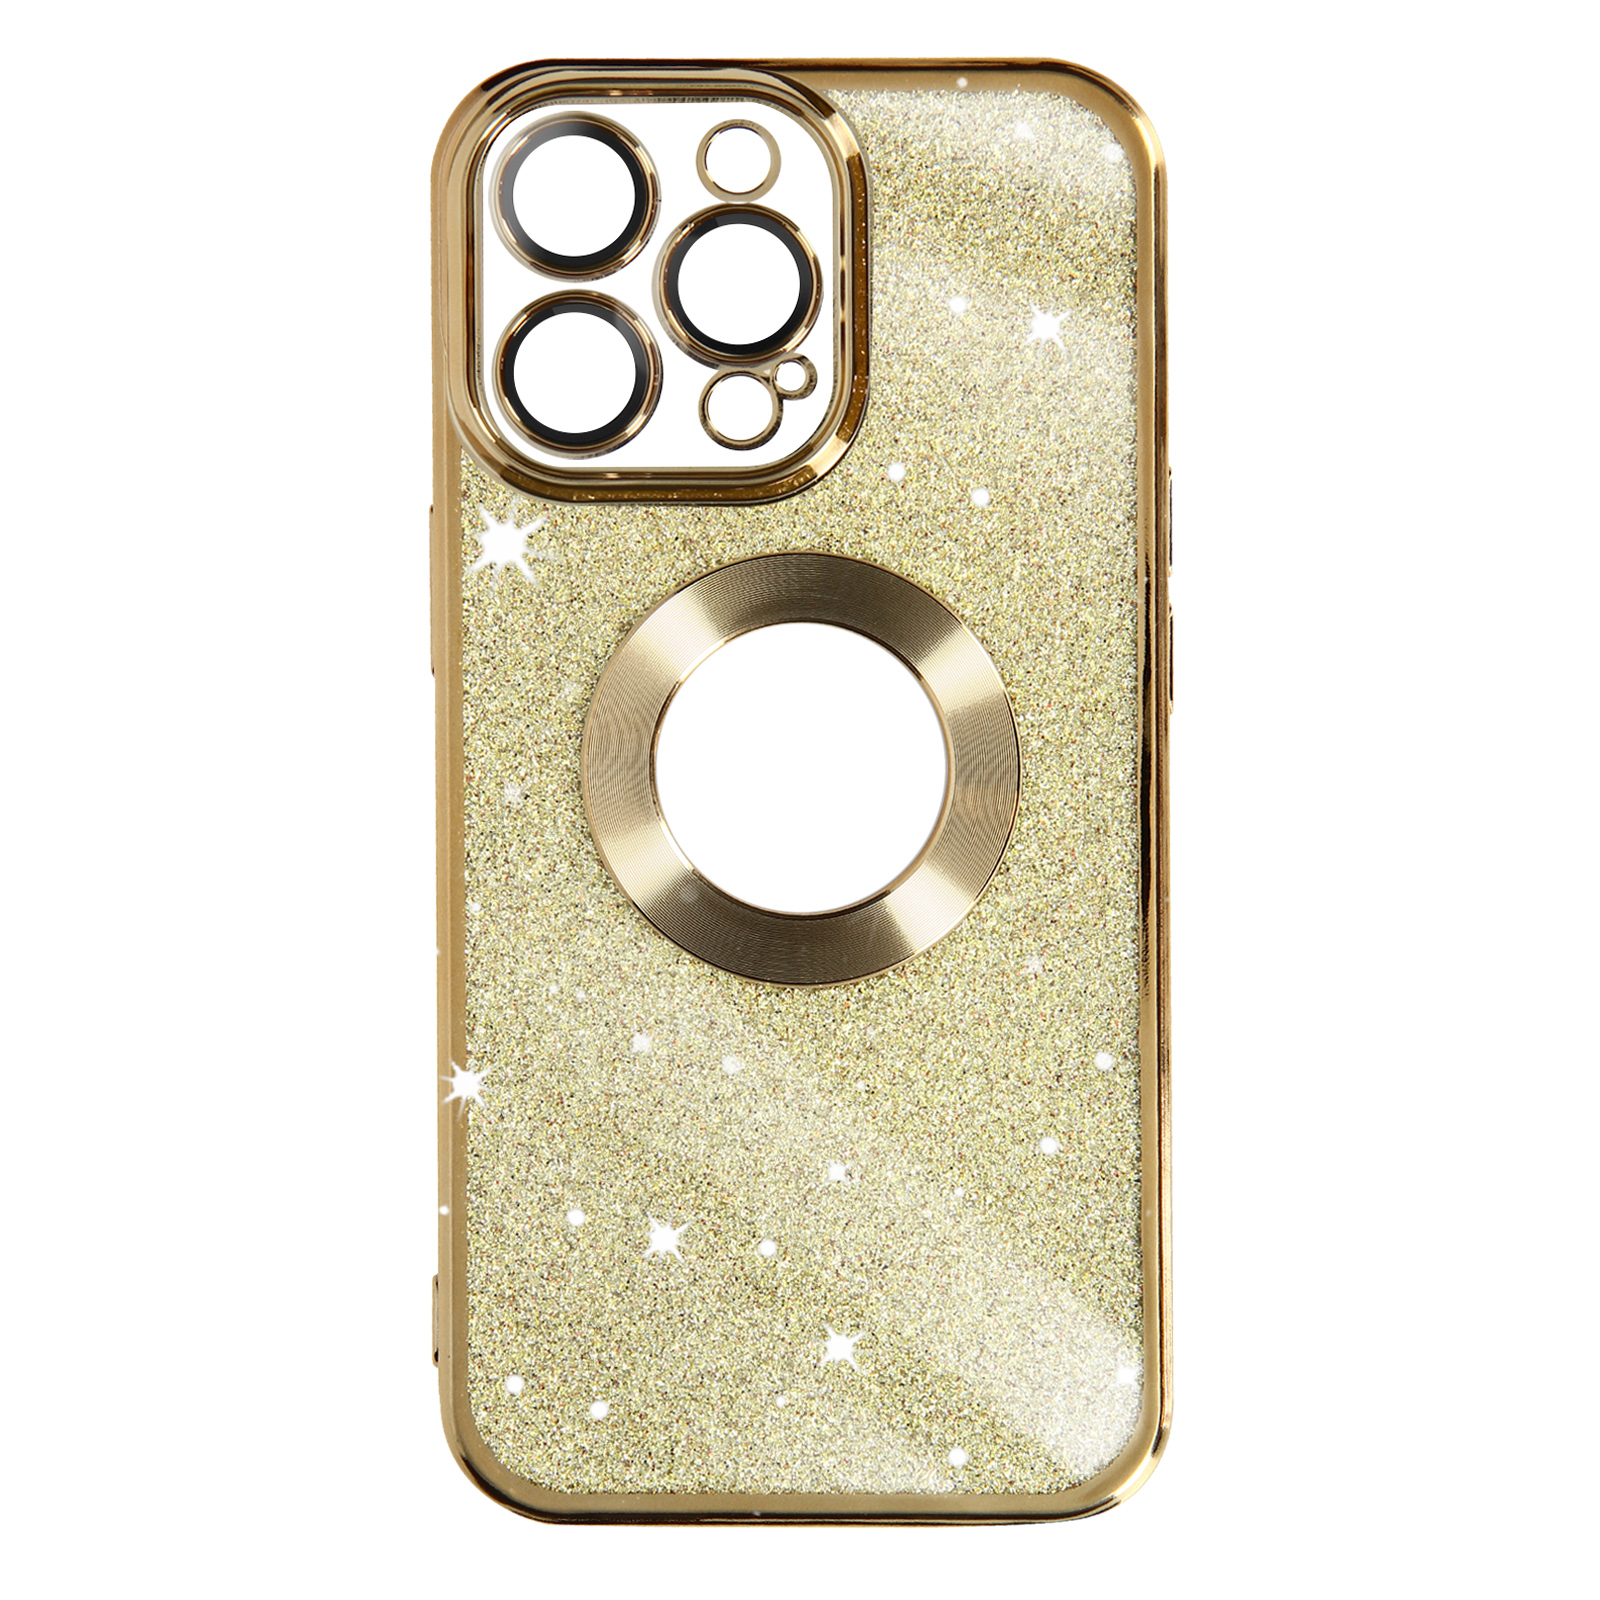 13 Spark Gold Pro, Protecam AVIZAR Apple, Backcover, iPhone Series,